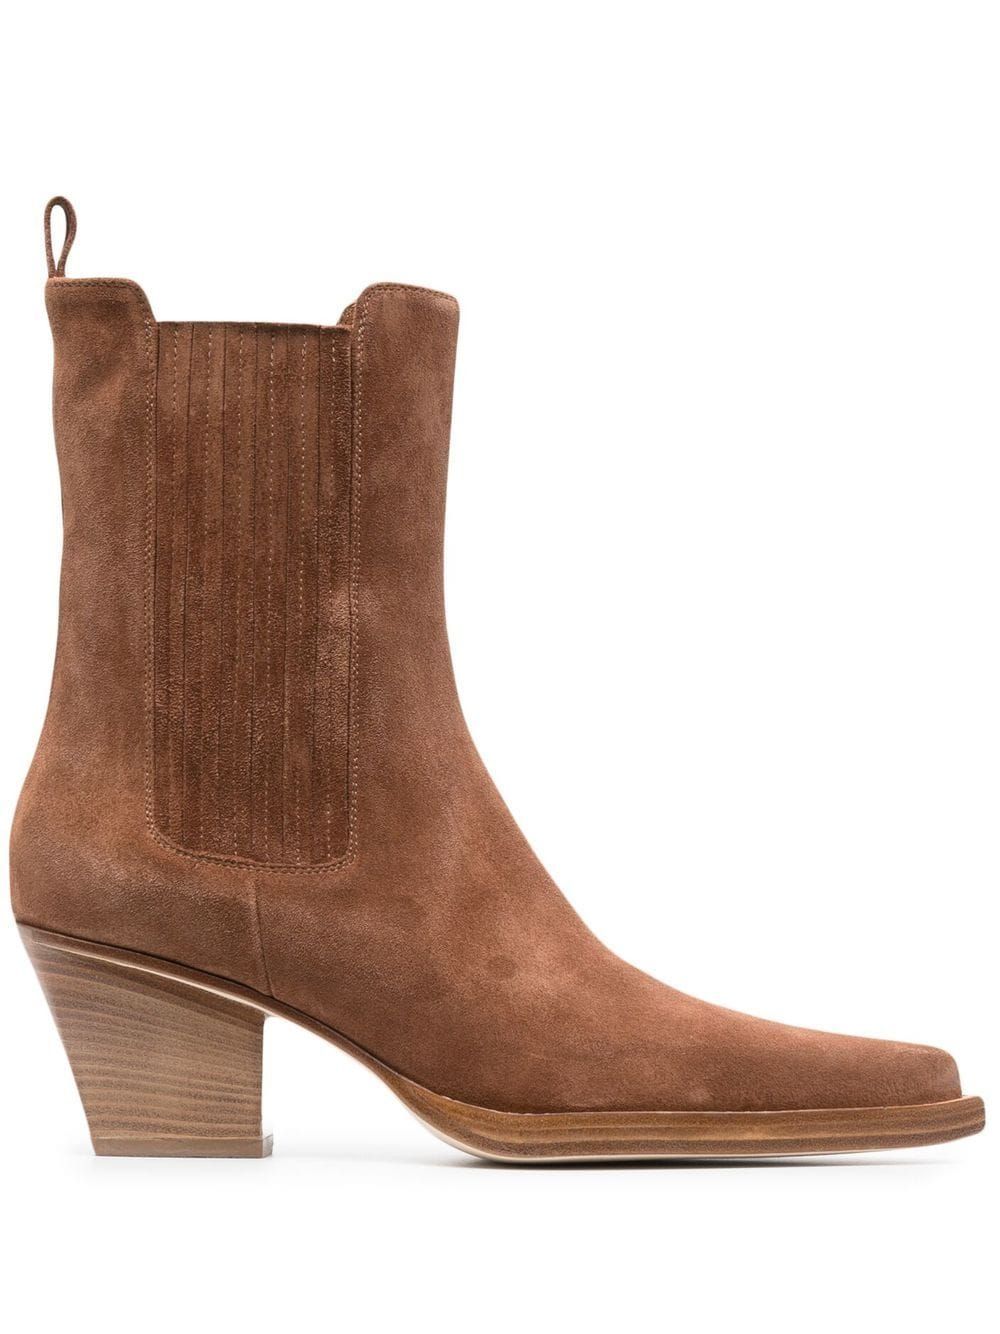 Dallas 100mm ankle boots | Farfetch Global